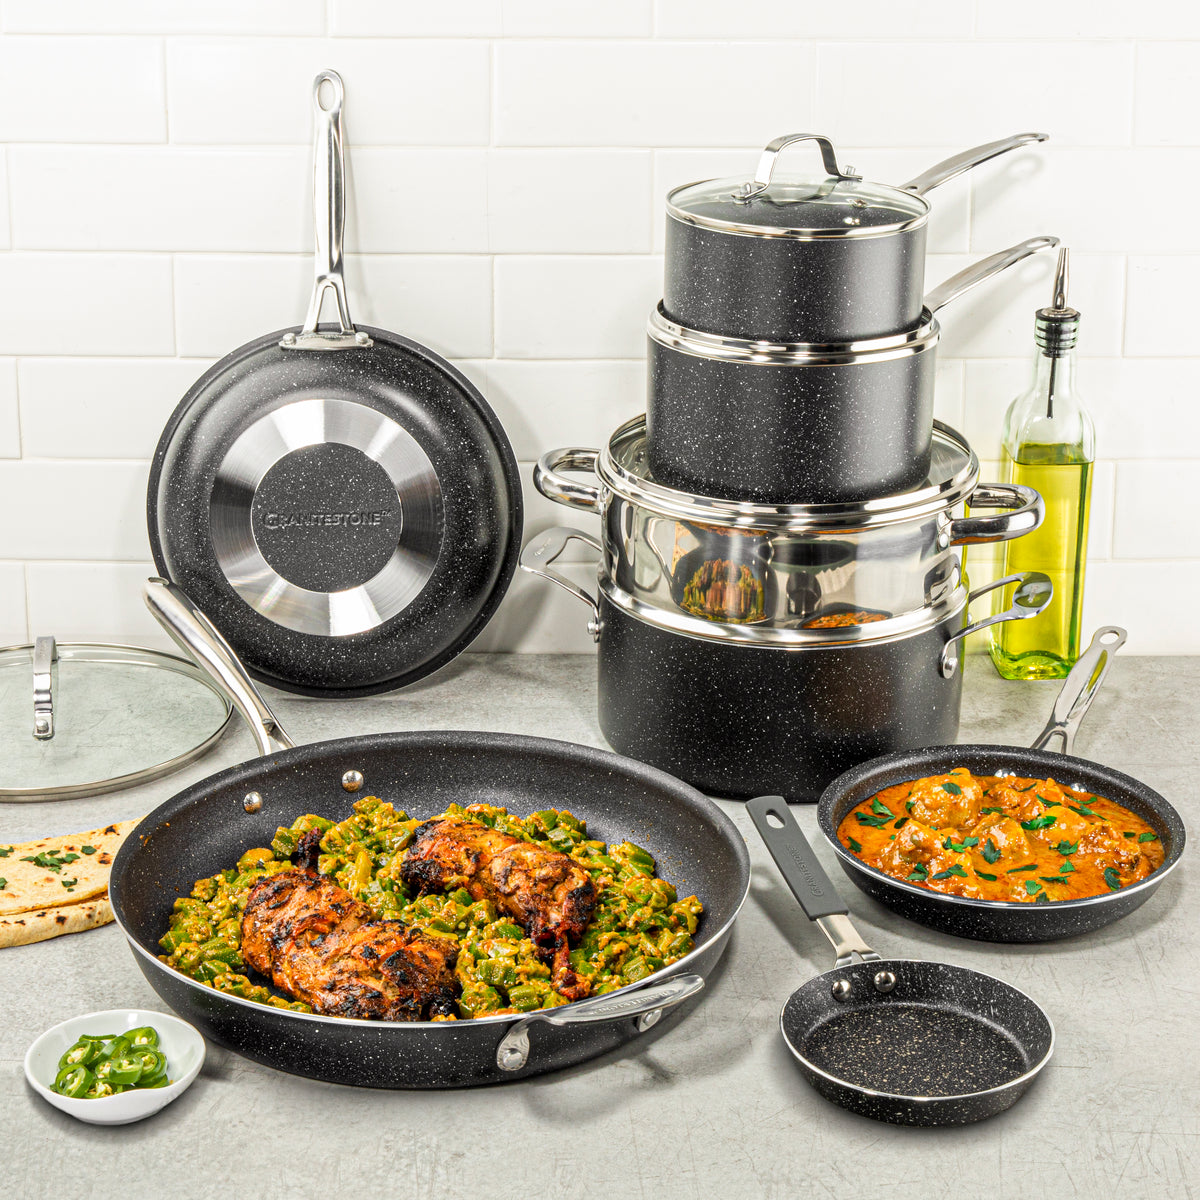 Granitestone 12 Piece All-Sizes Cookware Set - Includes 14 Family Pan